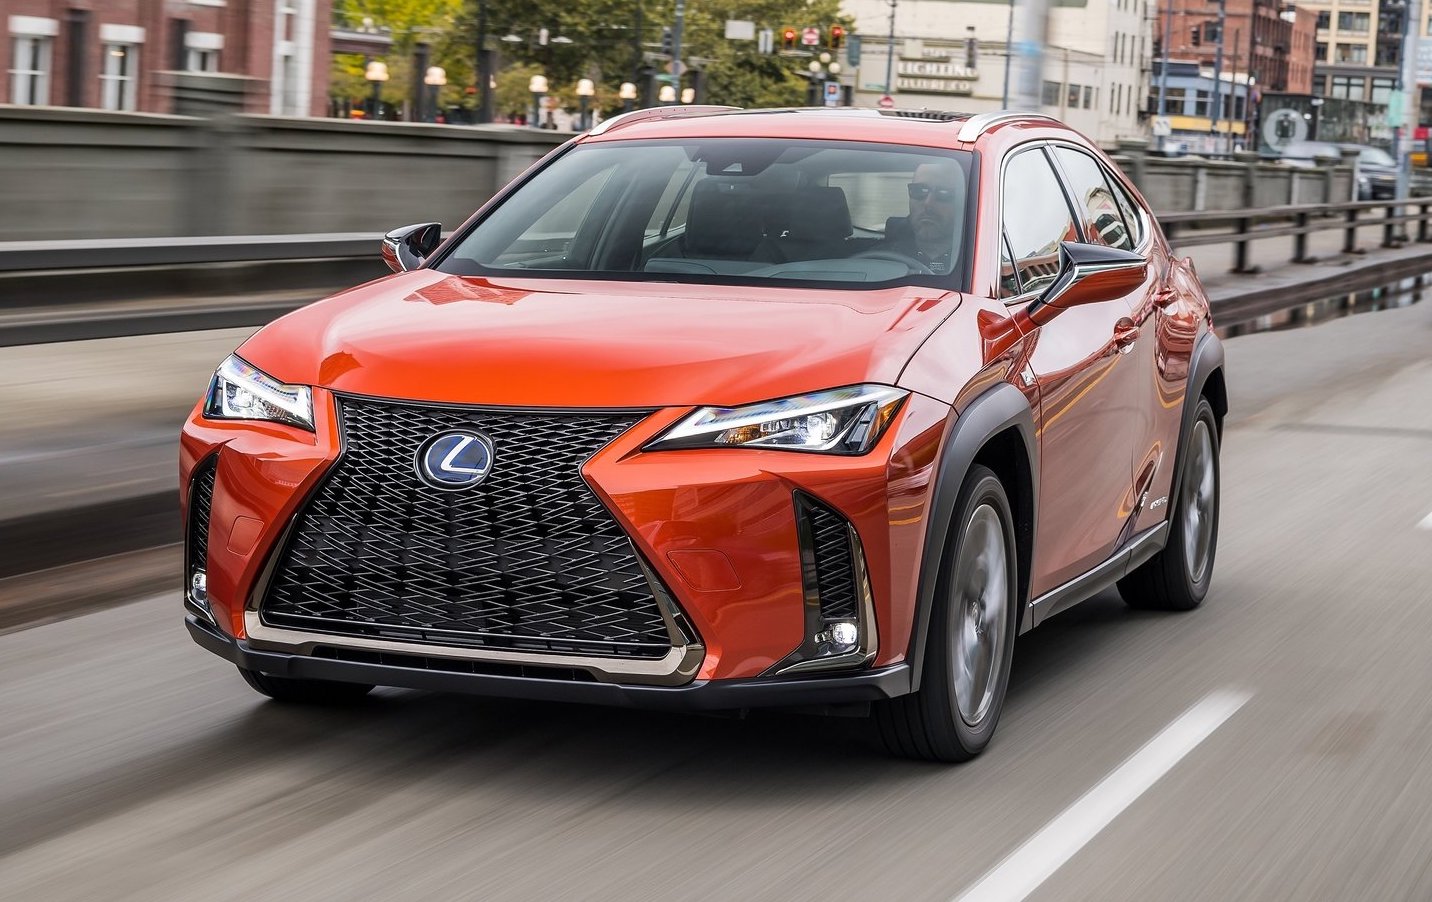 Lexus reports global sales record in 2019, up 10%